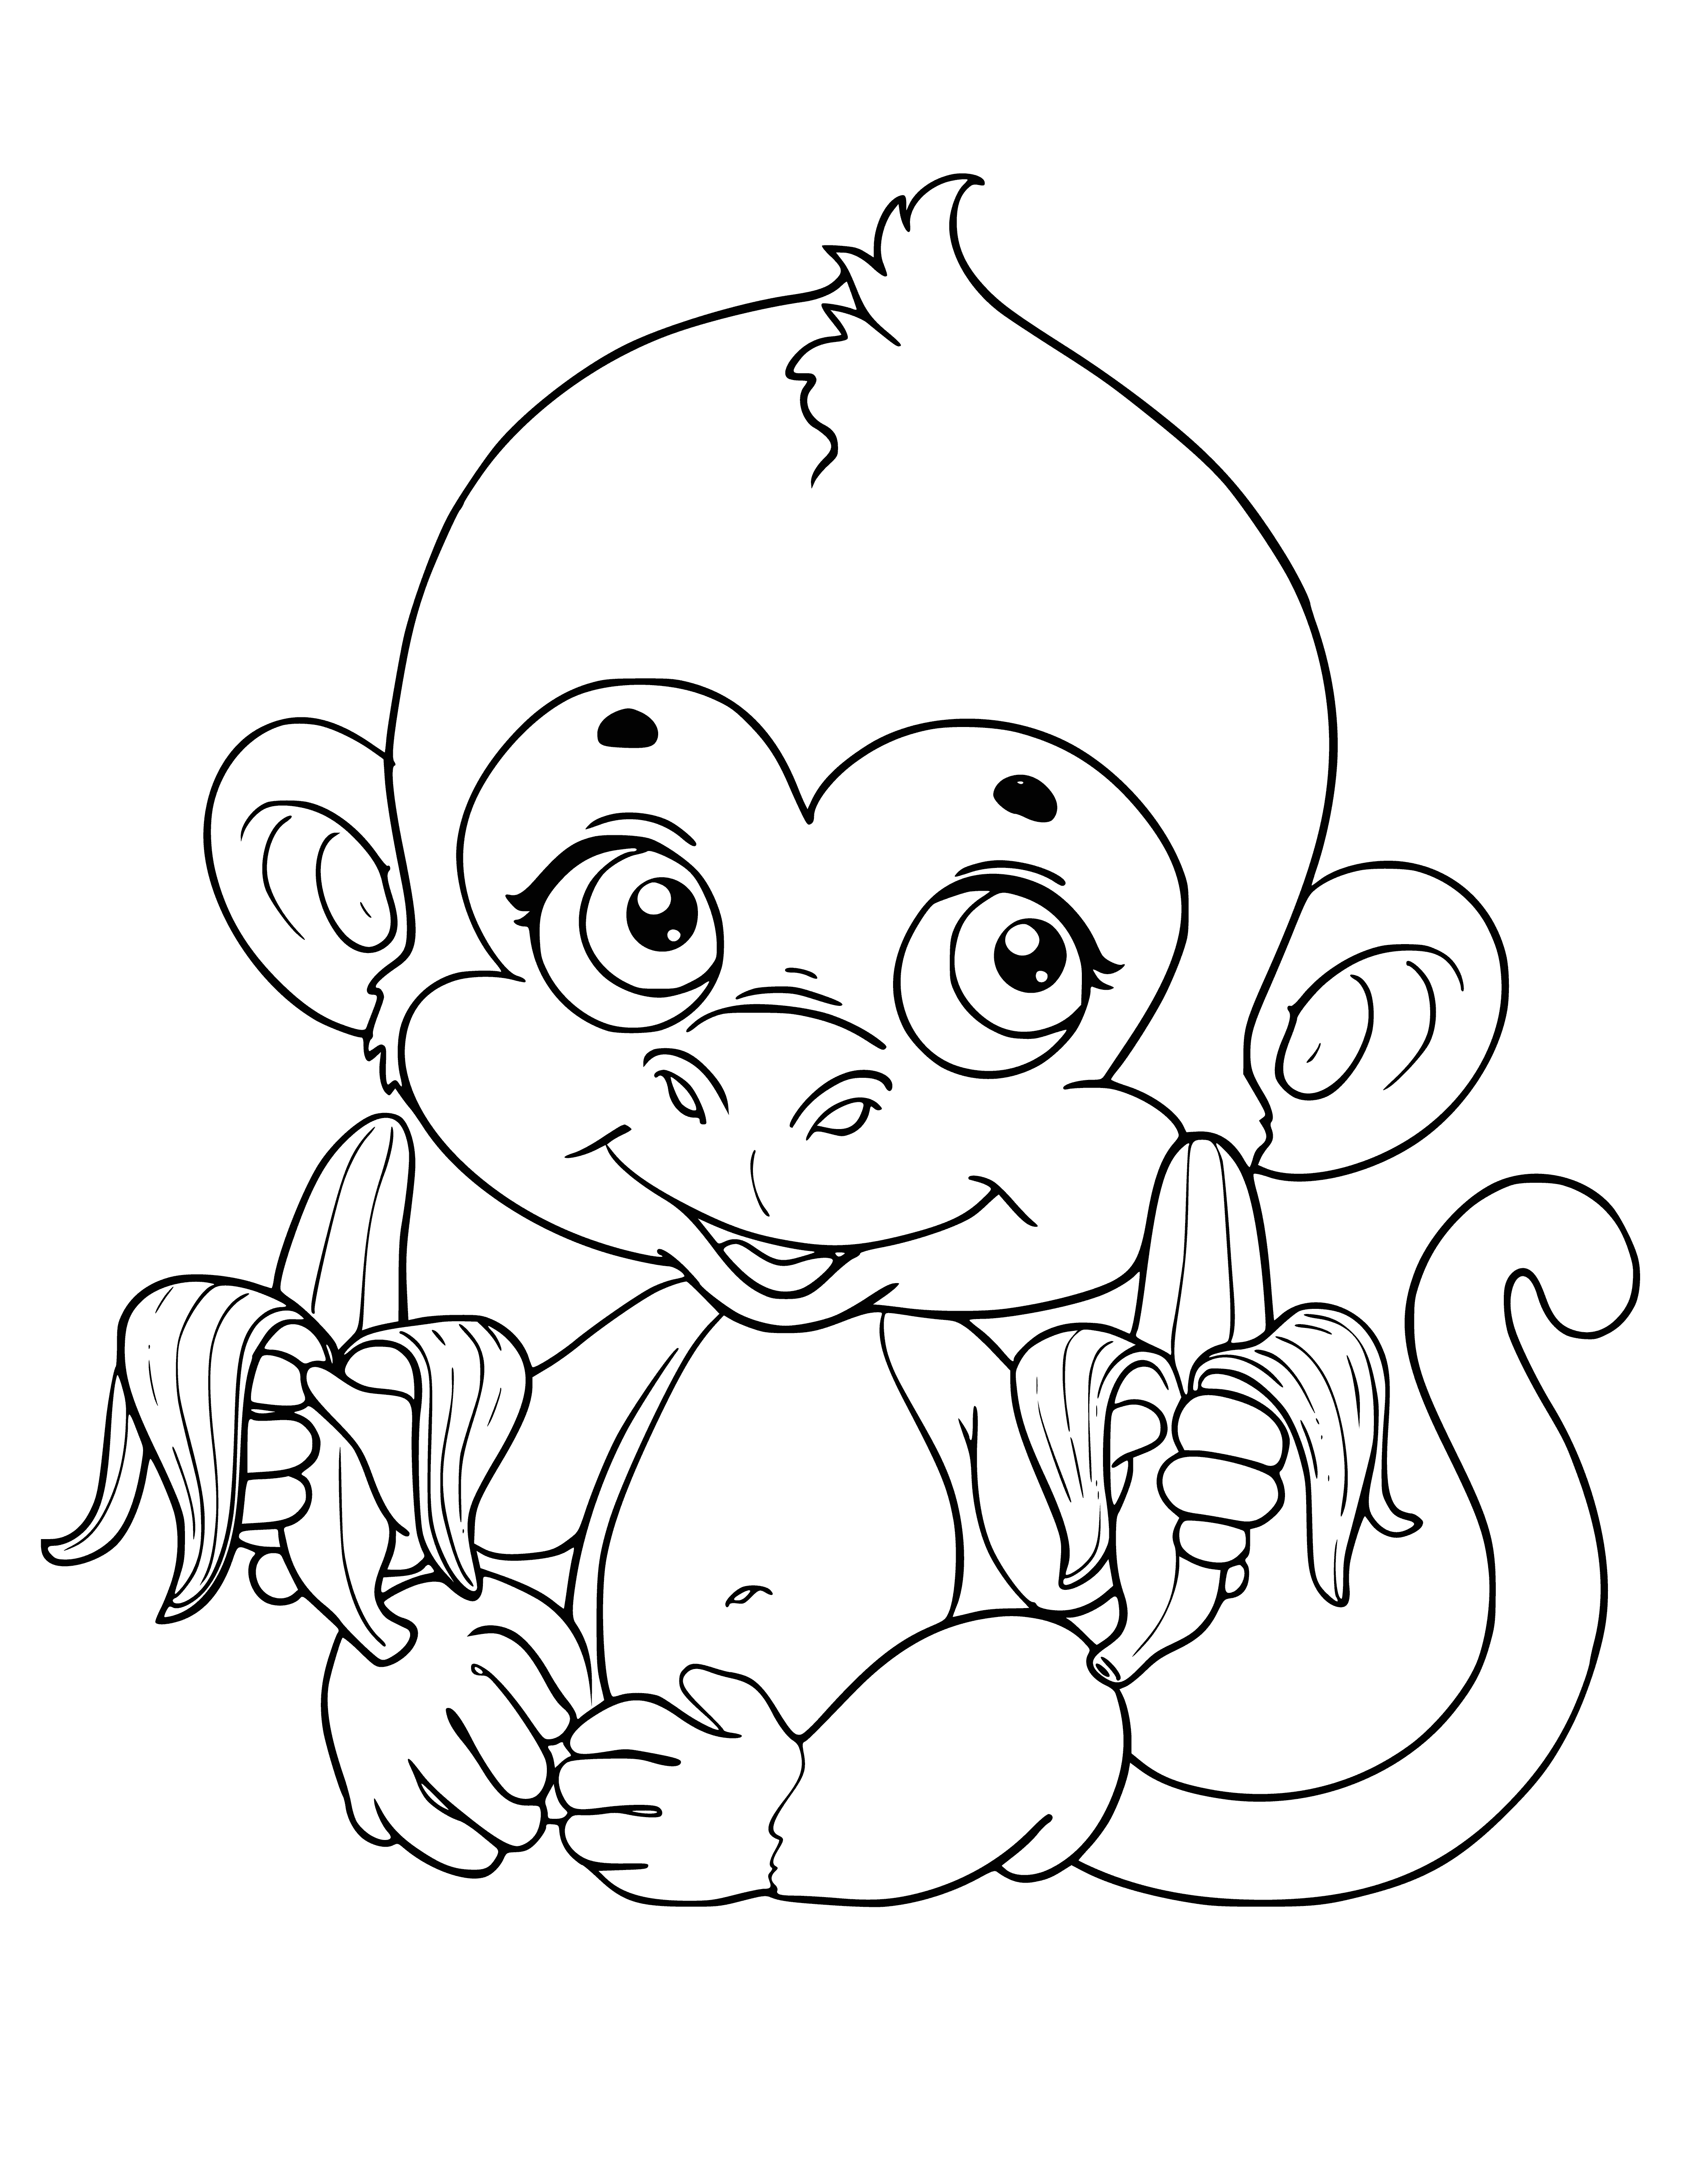 coloring page: Monkey sitting on a tree branch, eating bananas.